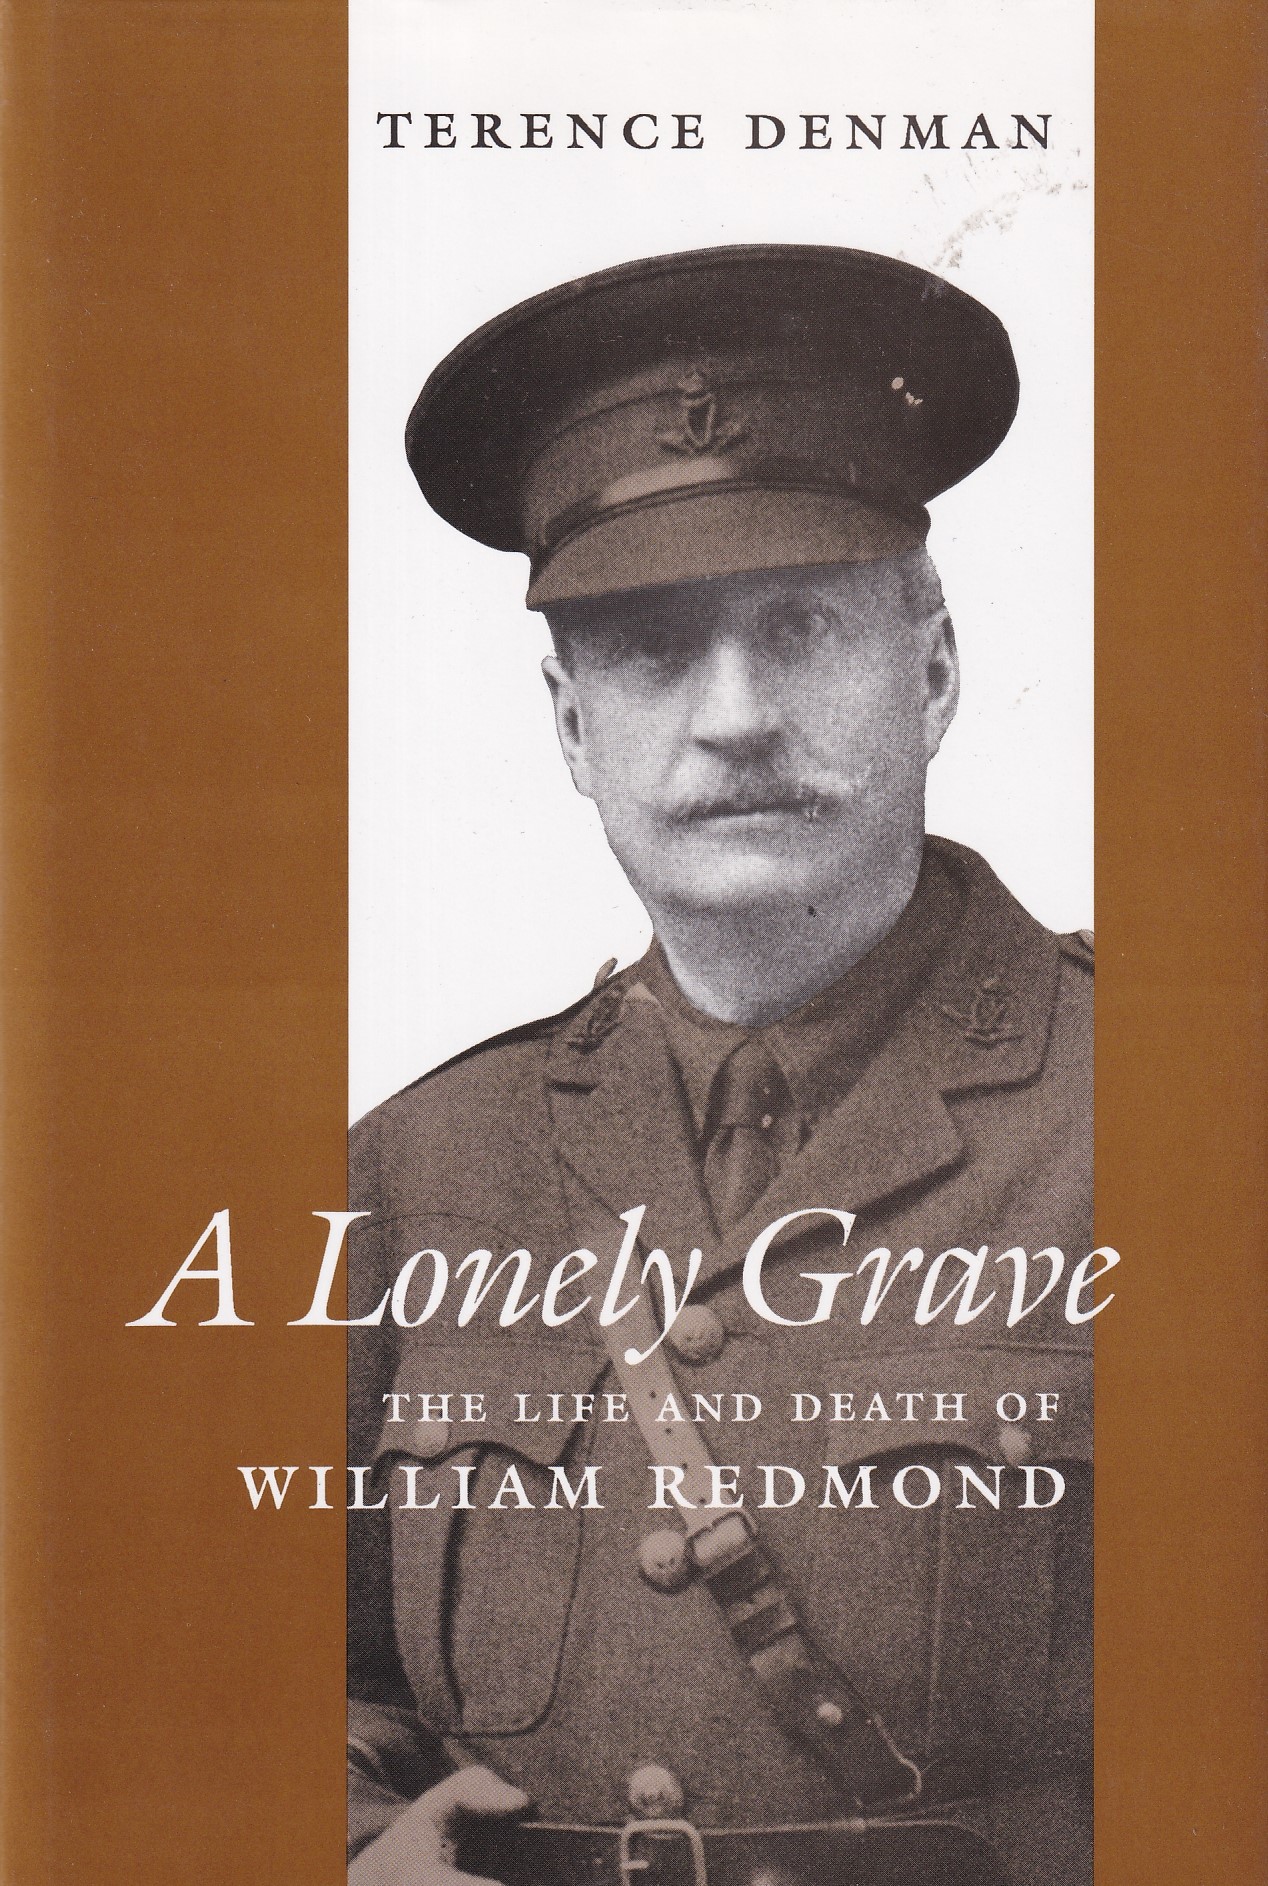 A Lonely Grave: The Life and Death of William Redmond by Terence Denman